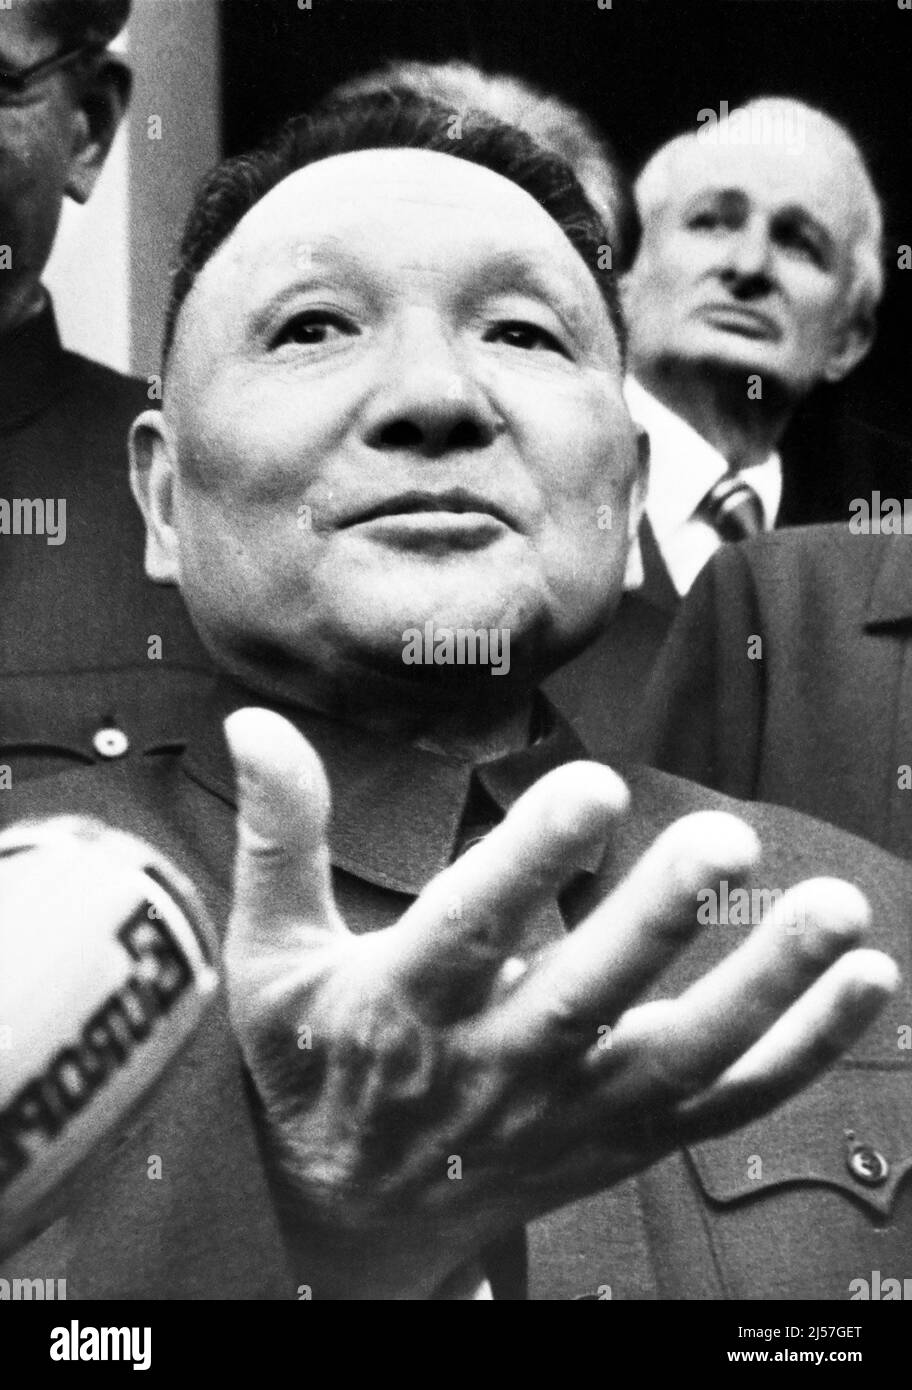 China: Deng Xiaoping (22 August 1904 – 19 February 1997) seen here on 6th April, 1976. Deng Xiaoping was a Chinese politician, statesman, theorist, and diplomat. As leader of the Communist Party of China, Deng was a reformer who led China towards a market economy. While Deng never held office as the head of state, head of government or General Secretary of the Communist Party of China (historically the highest position in Communist China), he nonetheless served as the paramount leader of the People's Republic of China from 1978 to 1992. Stock Photo